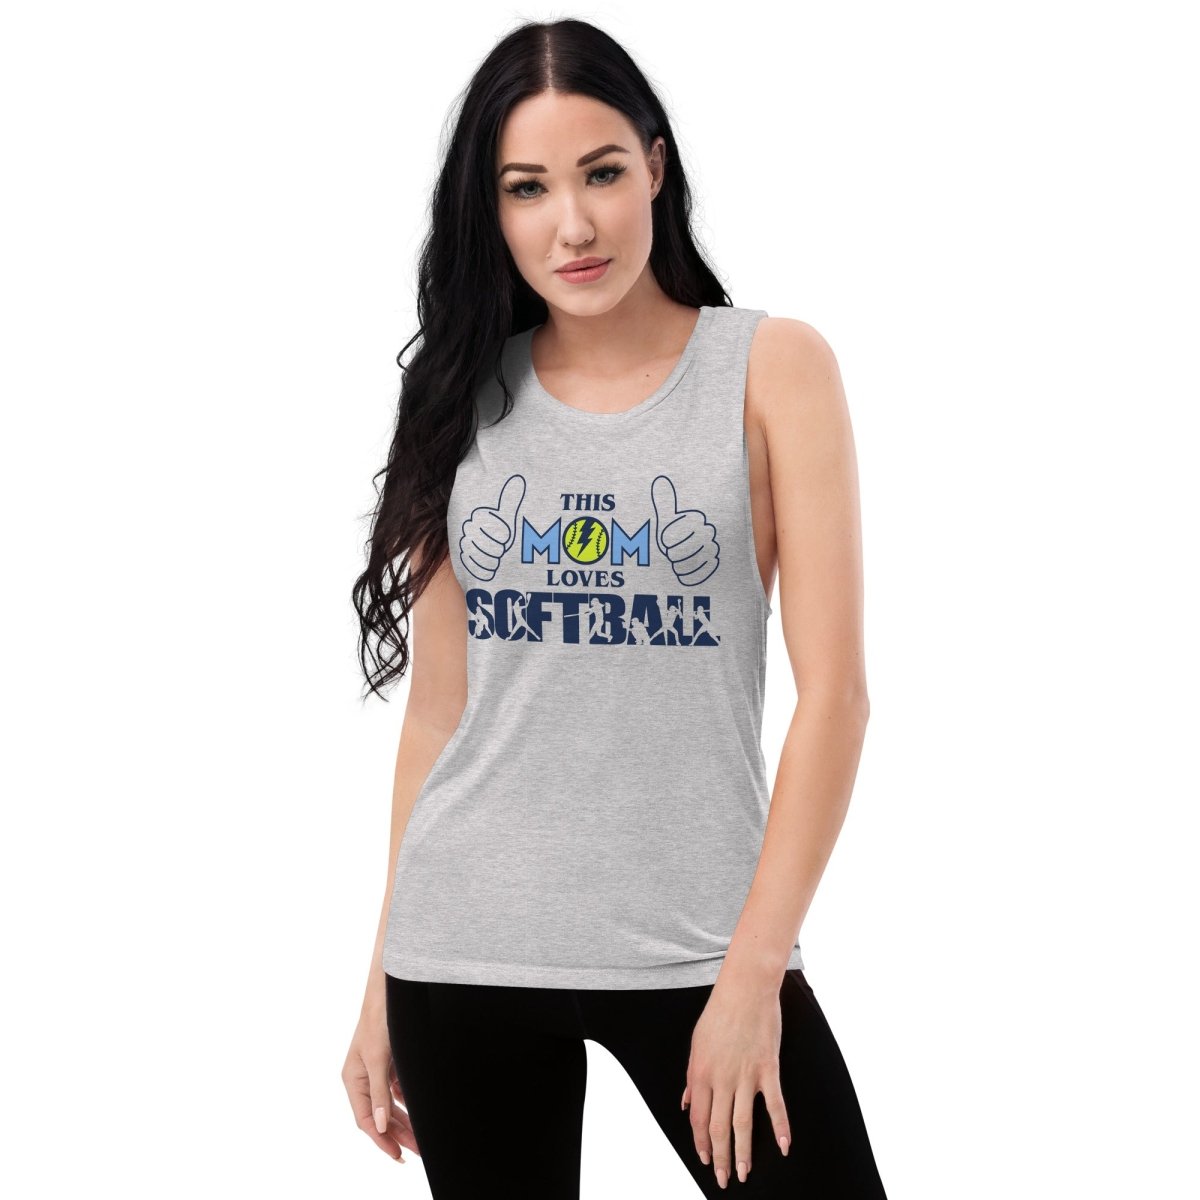 This Mom Women's Muscle Tank